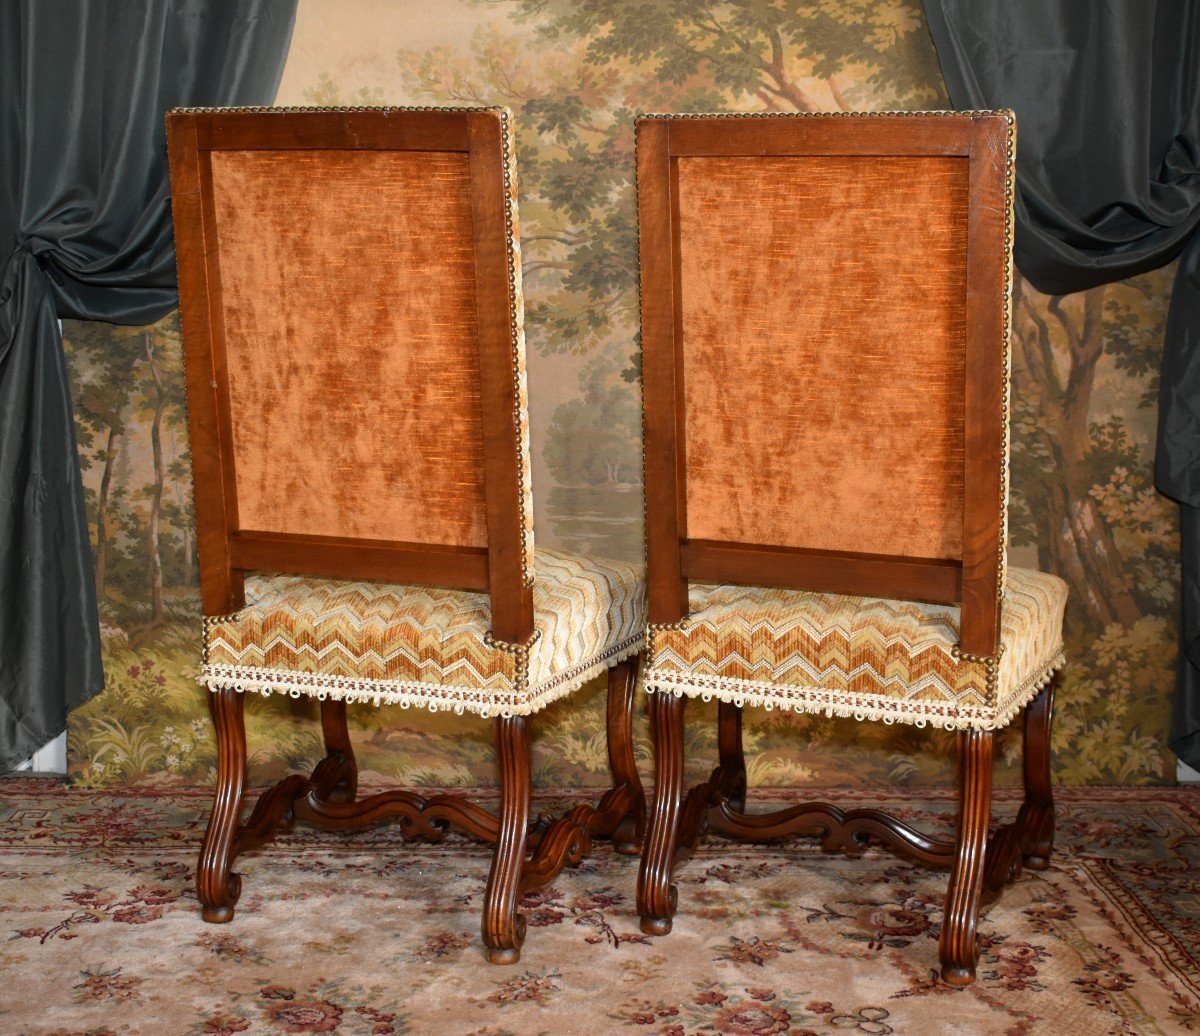 Pair Of Louis XIV Style Chairs In Walnut With Console Legs, Velvet Fabric With Herringbone Pattern-photo-2